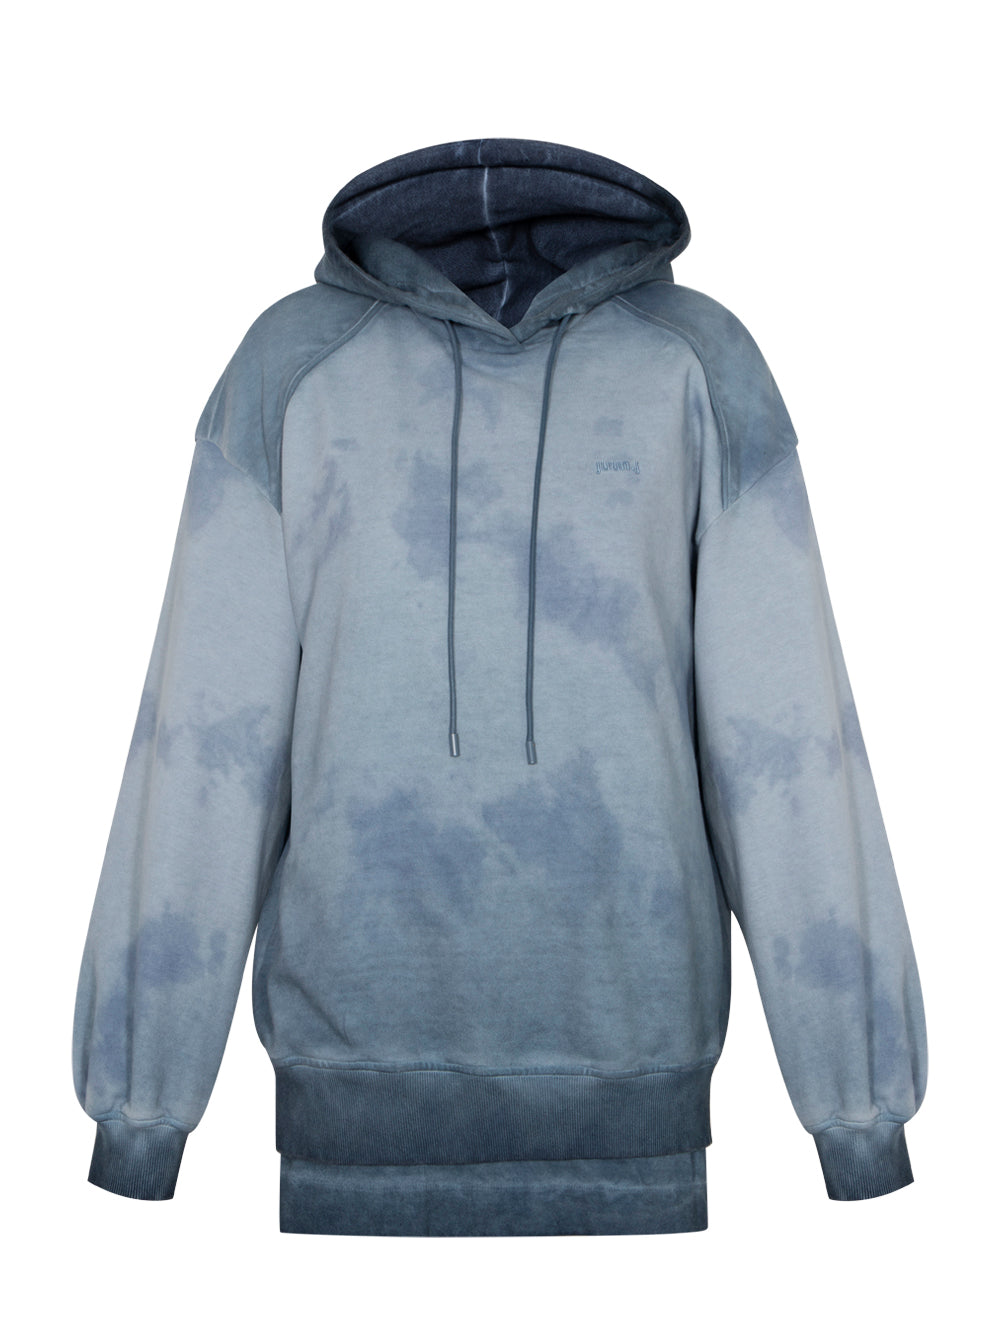 Overfit Layered Overdyed Hoodie Blue